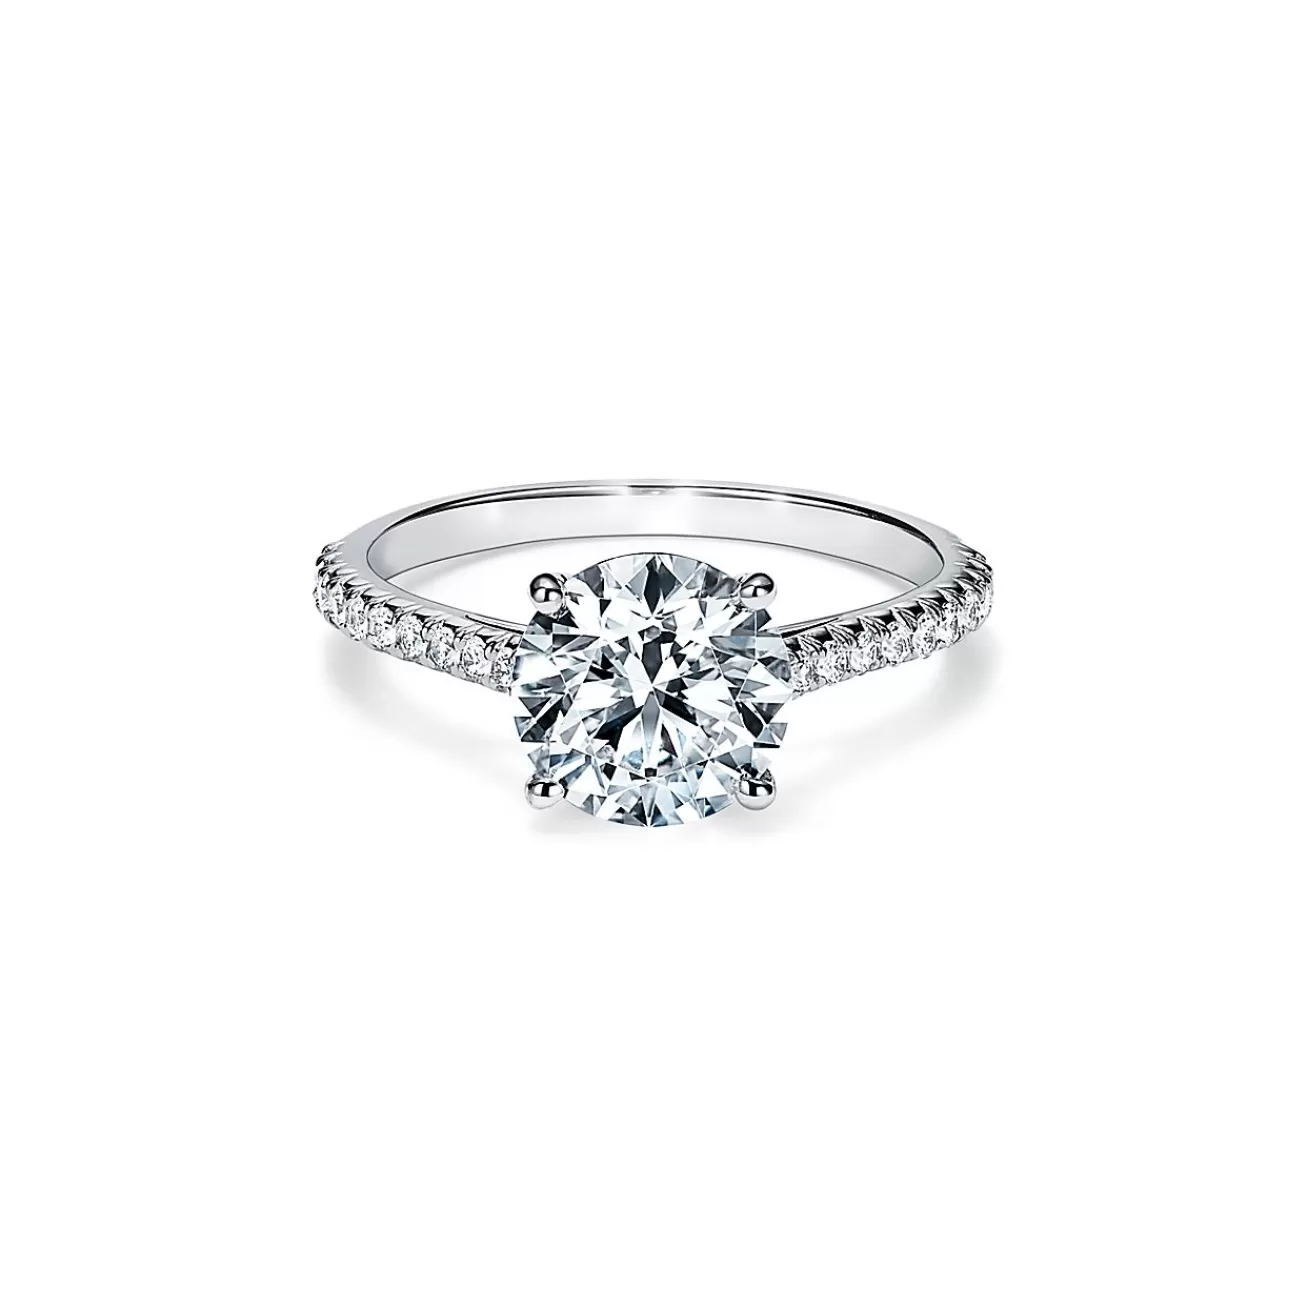 Tiffany & Co. Tiffany Novo® round brilliant engagement ring with a pavé diamond platinum band. | ^ Engagement Rings